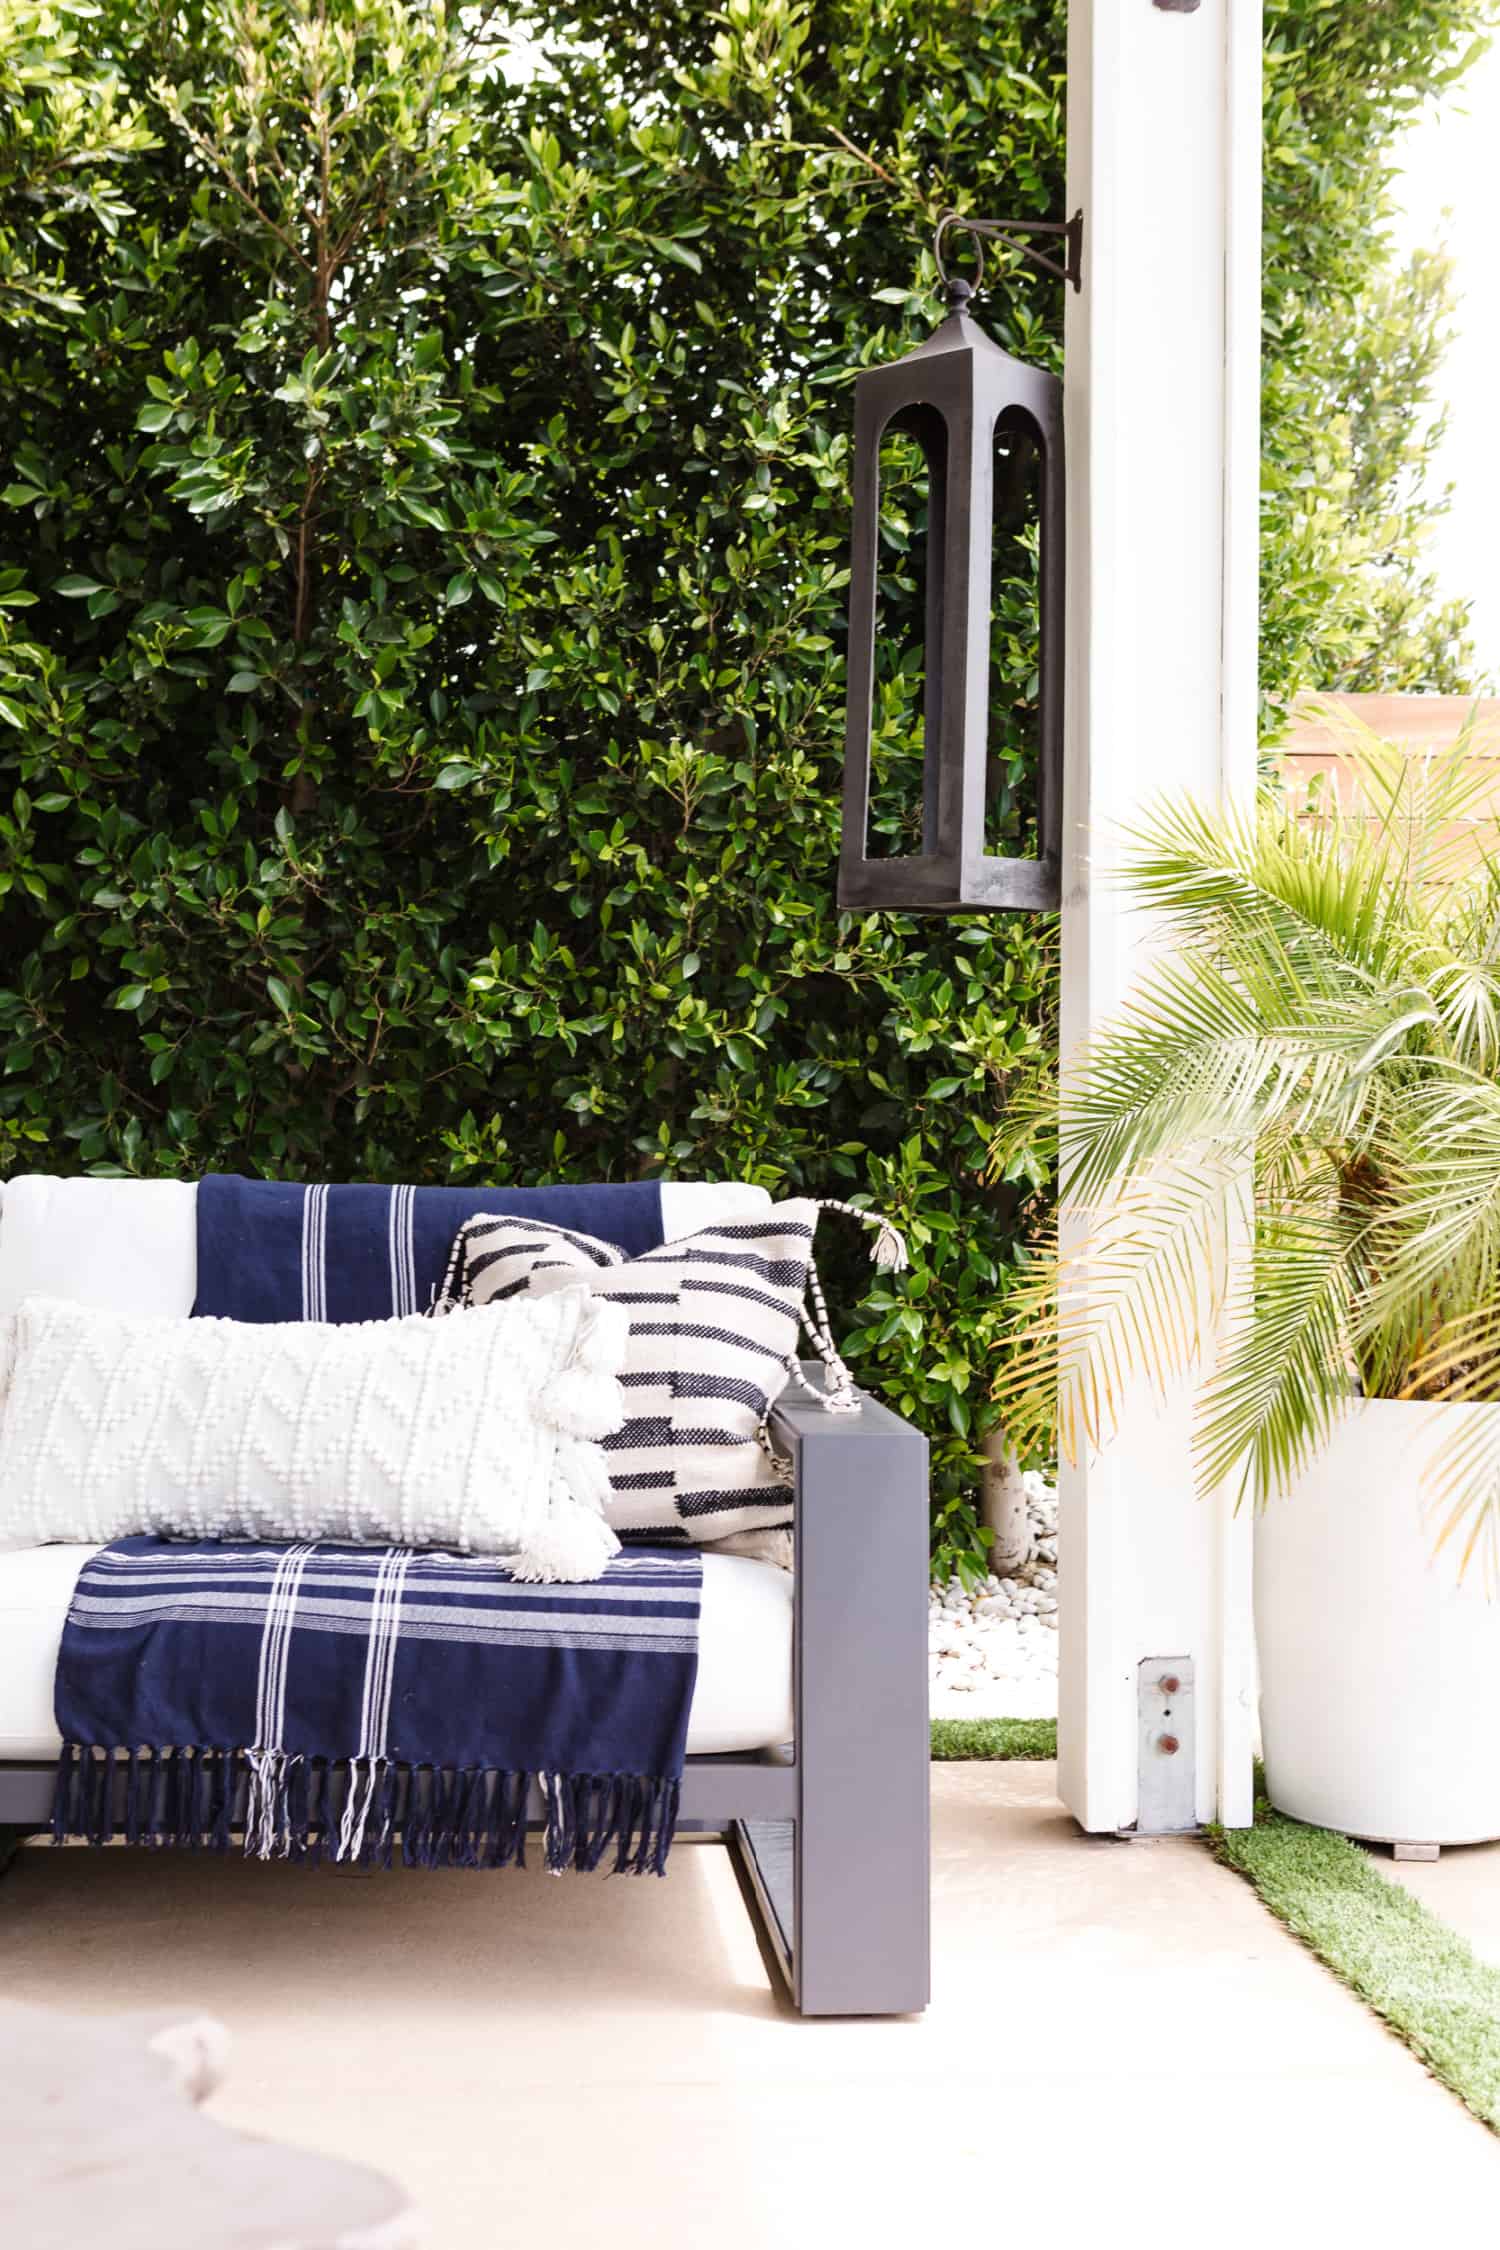 A cozy outdoor seating area with white and blue pillows and blankets. A large palm in a planter is off to the side.